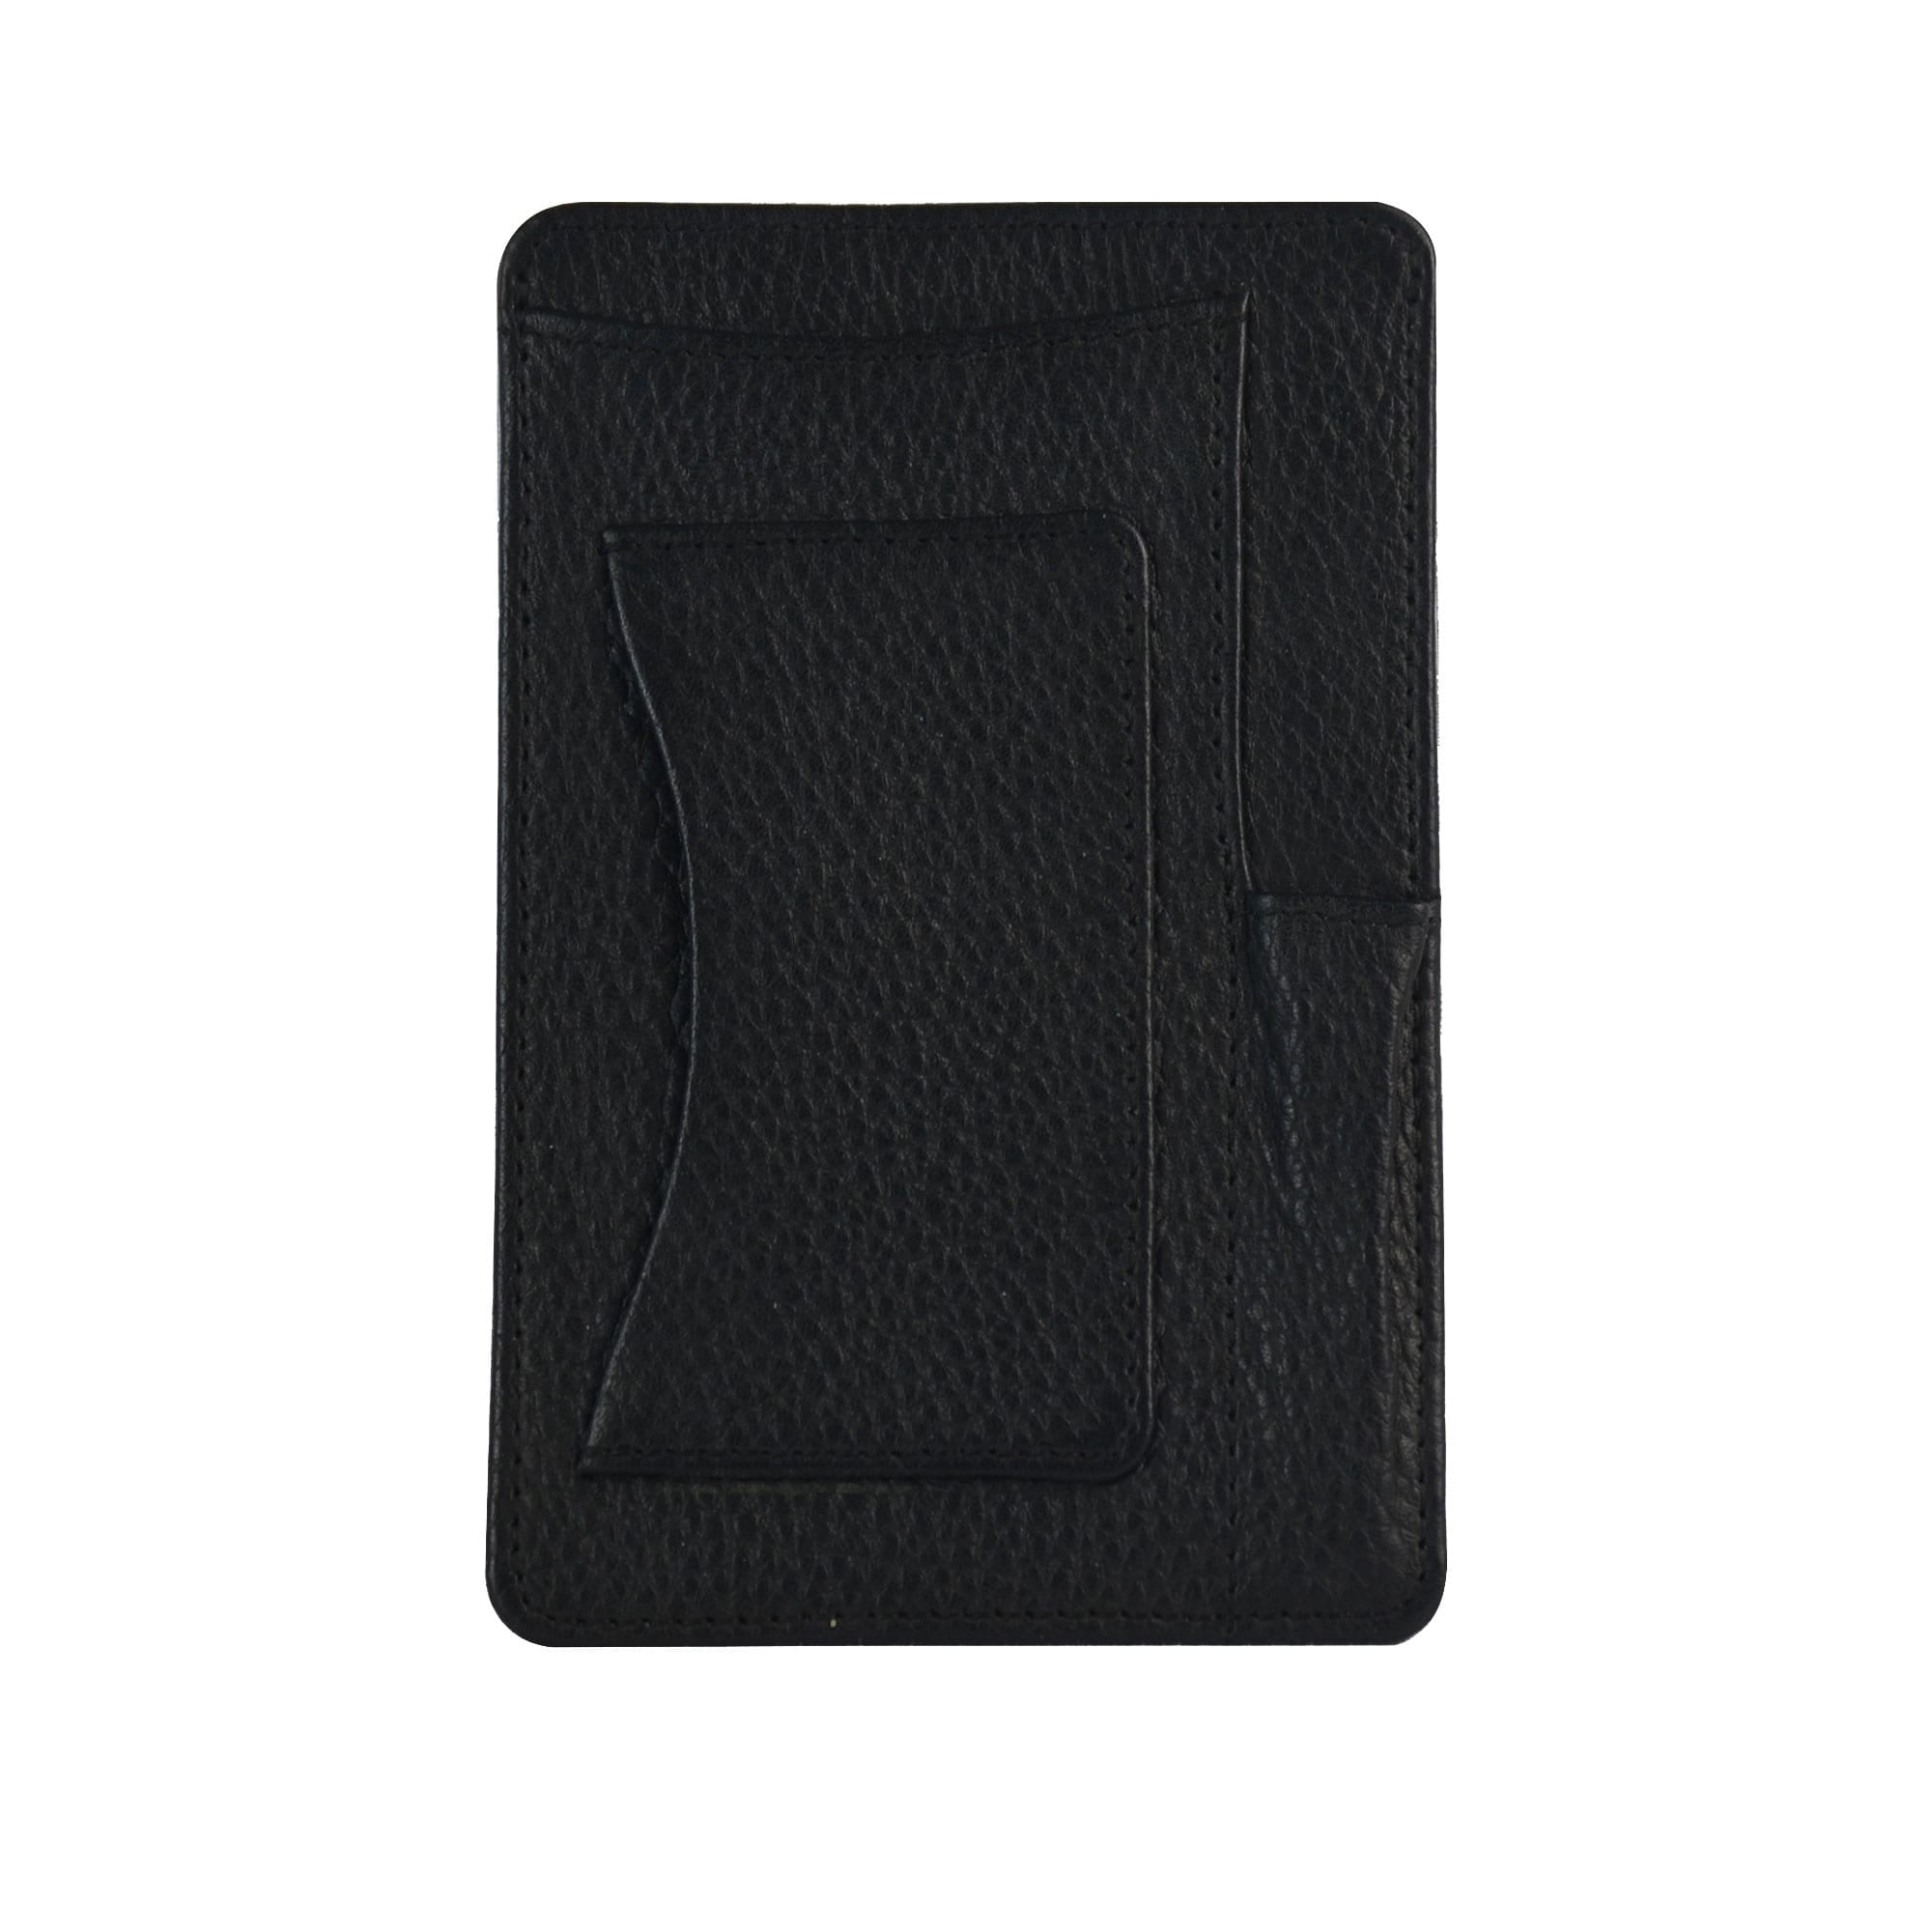 Genuine Leather 4 x 6 Notepad Holder with Pen Holder and Card Slot ...